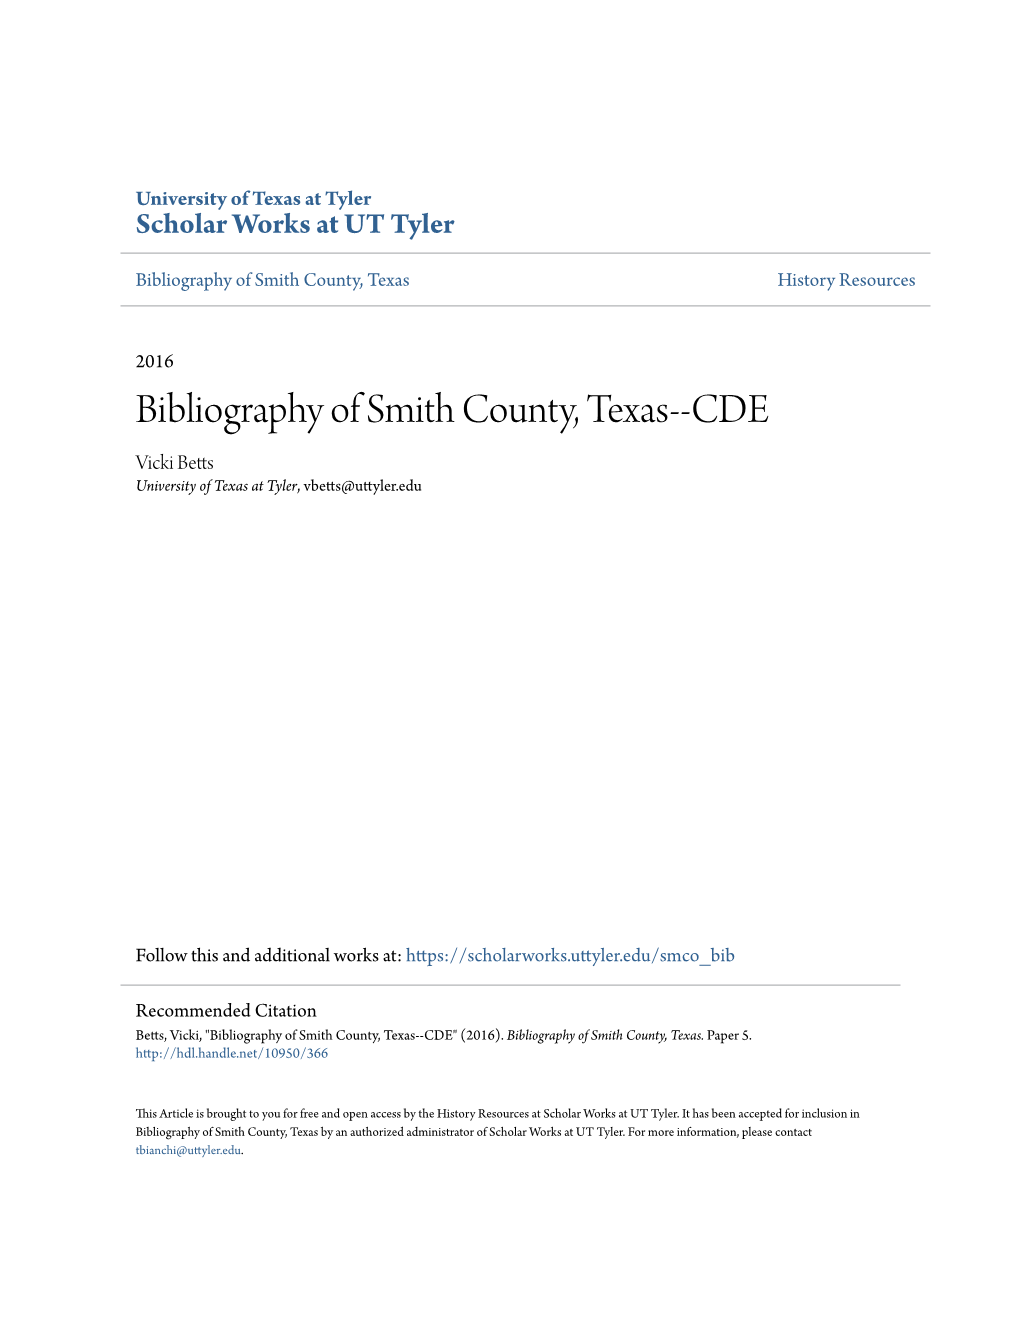 Bibliography of Smith County, Texas History Resources